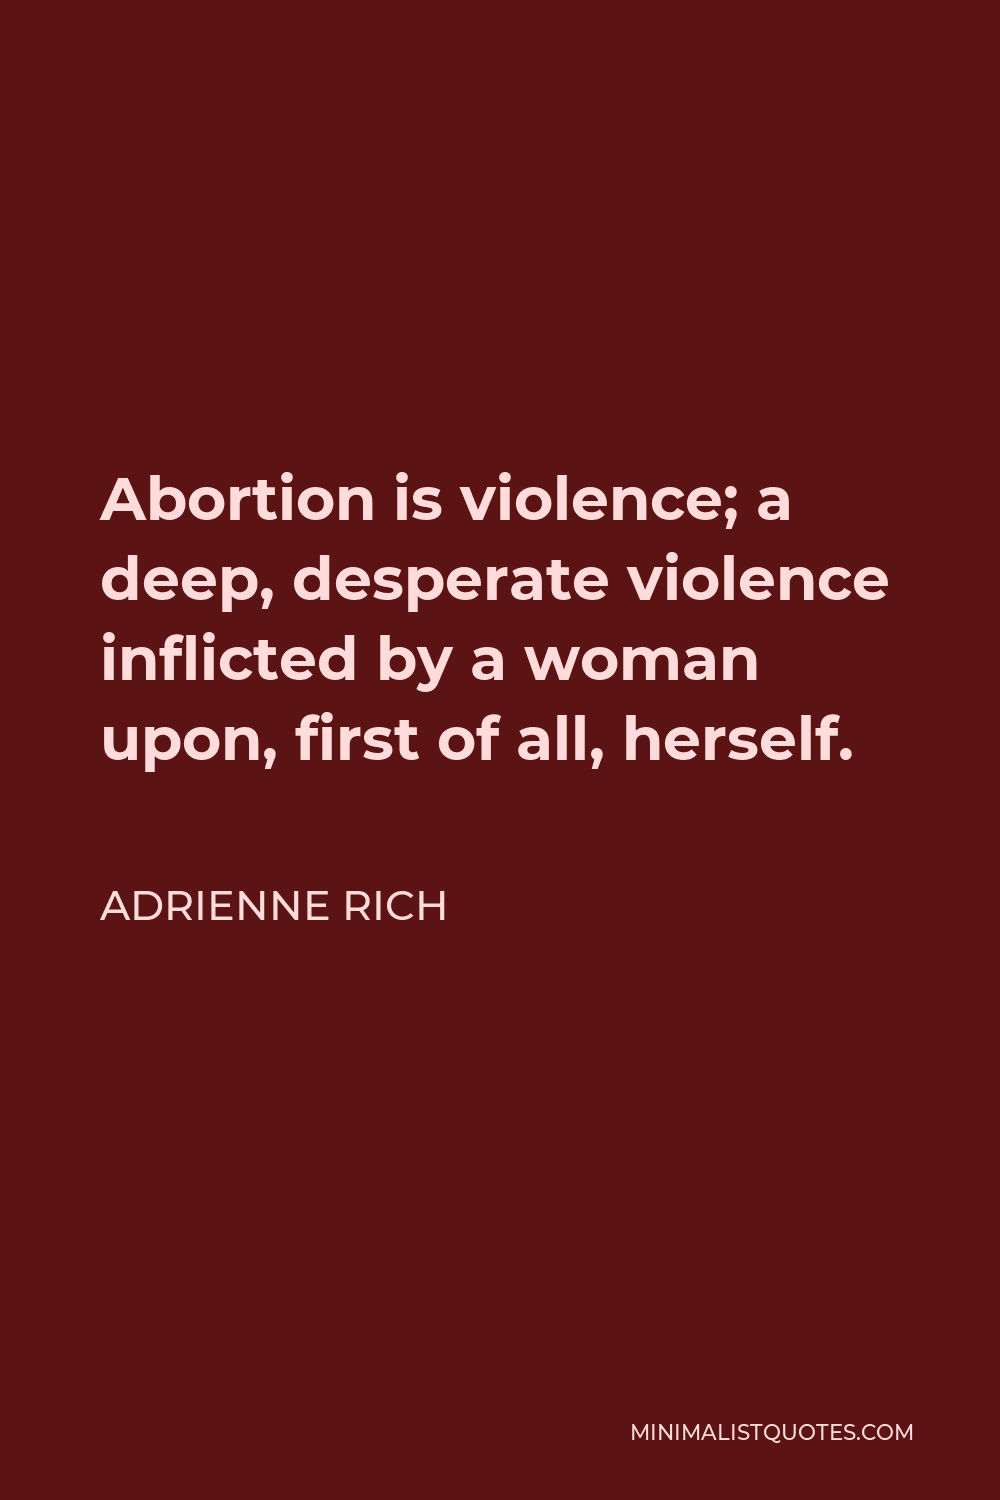 Adrienne Rich Quote - Abortion is violence; a deep, desperate violence inflicted by a woman upon, first of all, herself.